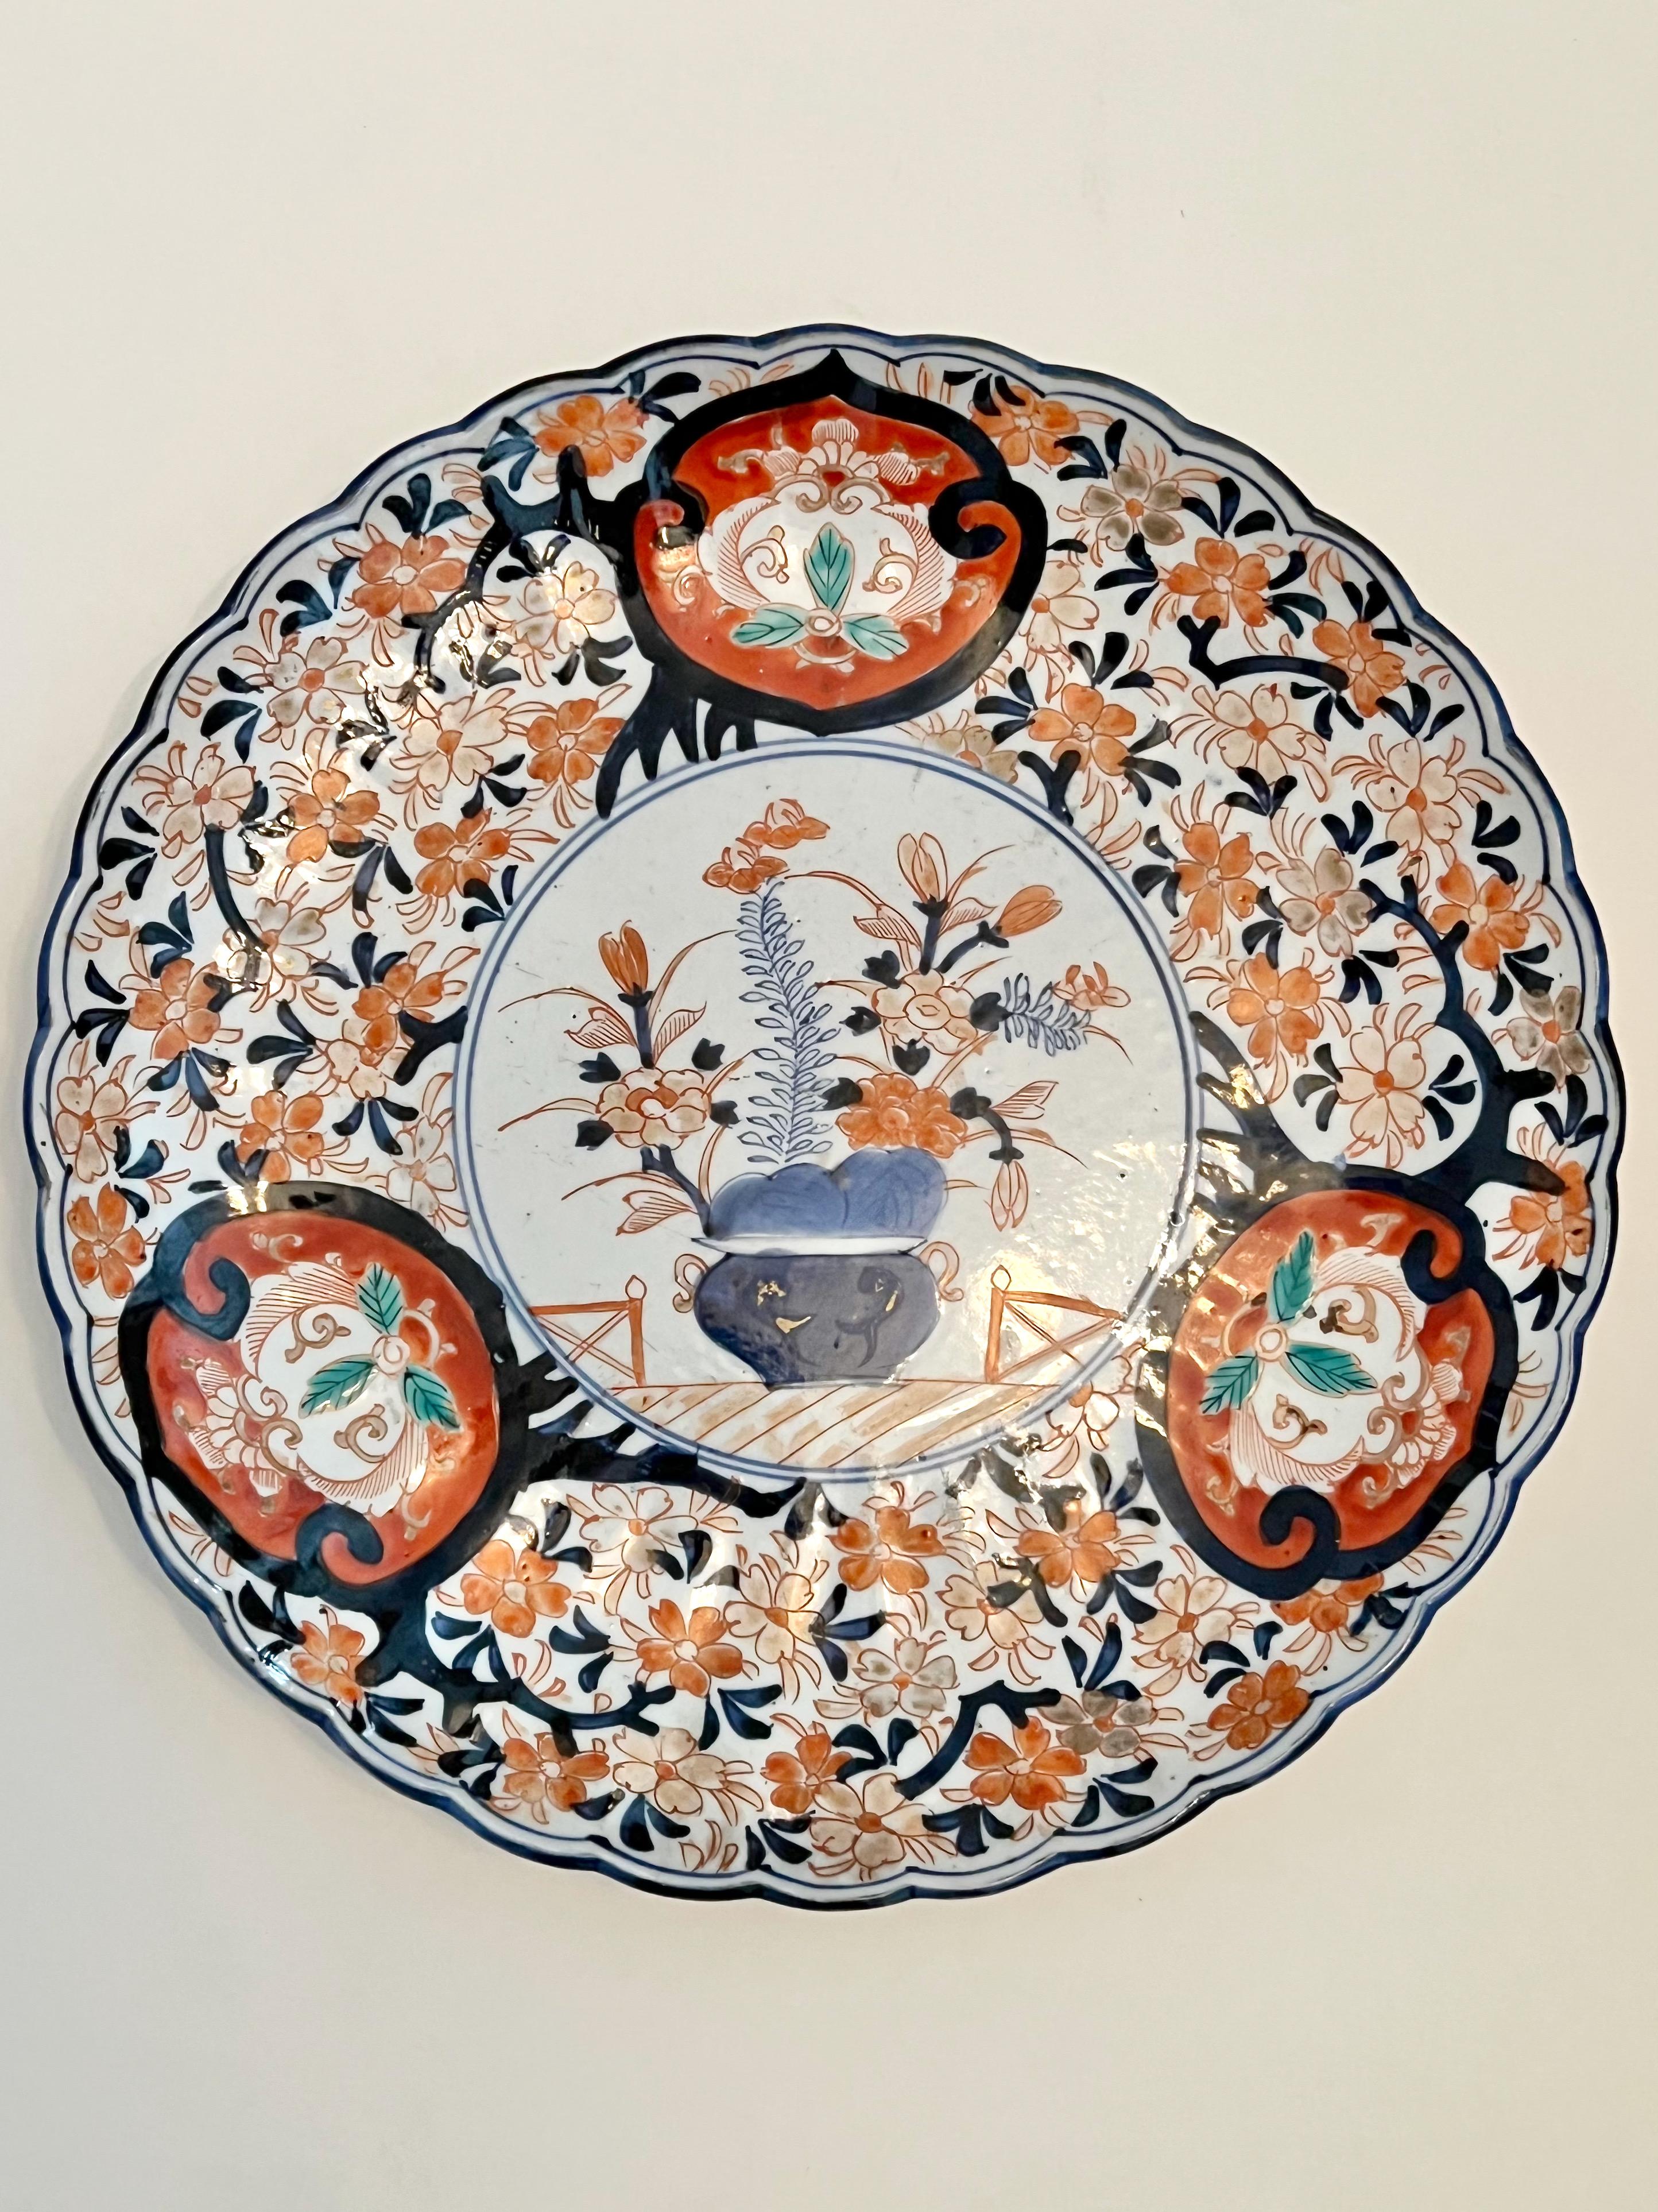 This is a good example of an Imari Charger that features a central basket, small scalloped border with an allover cherry blossom motif with three reserves. The diameter of the charger is 12 inches. The reverse features a scrolling vine design. The